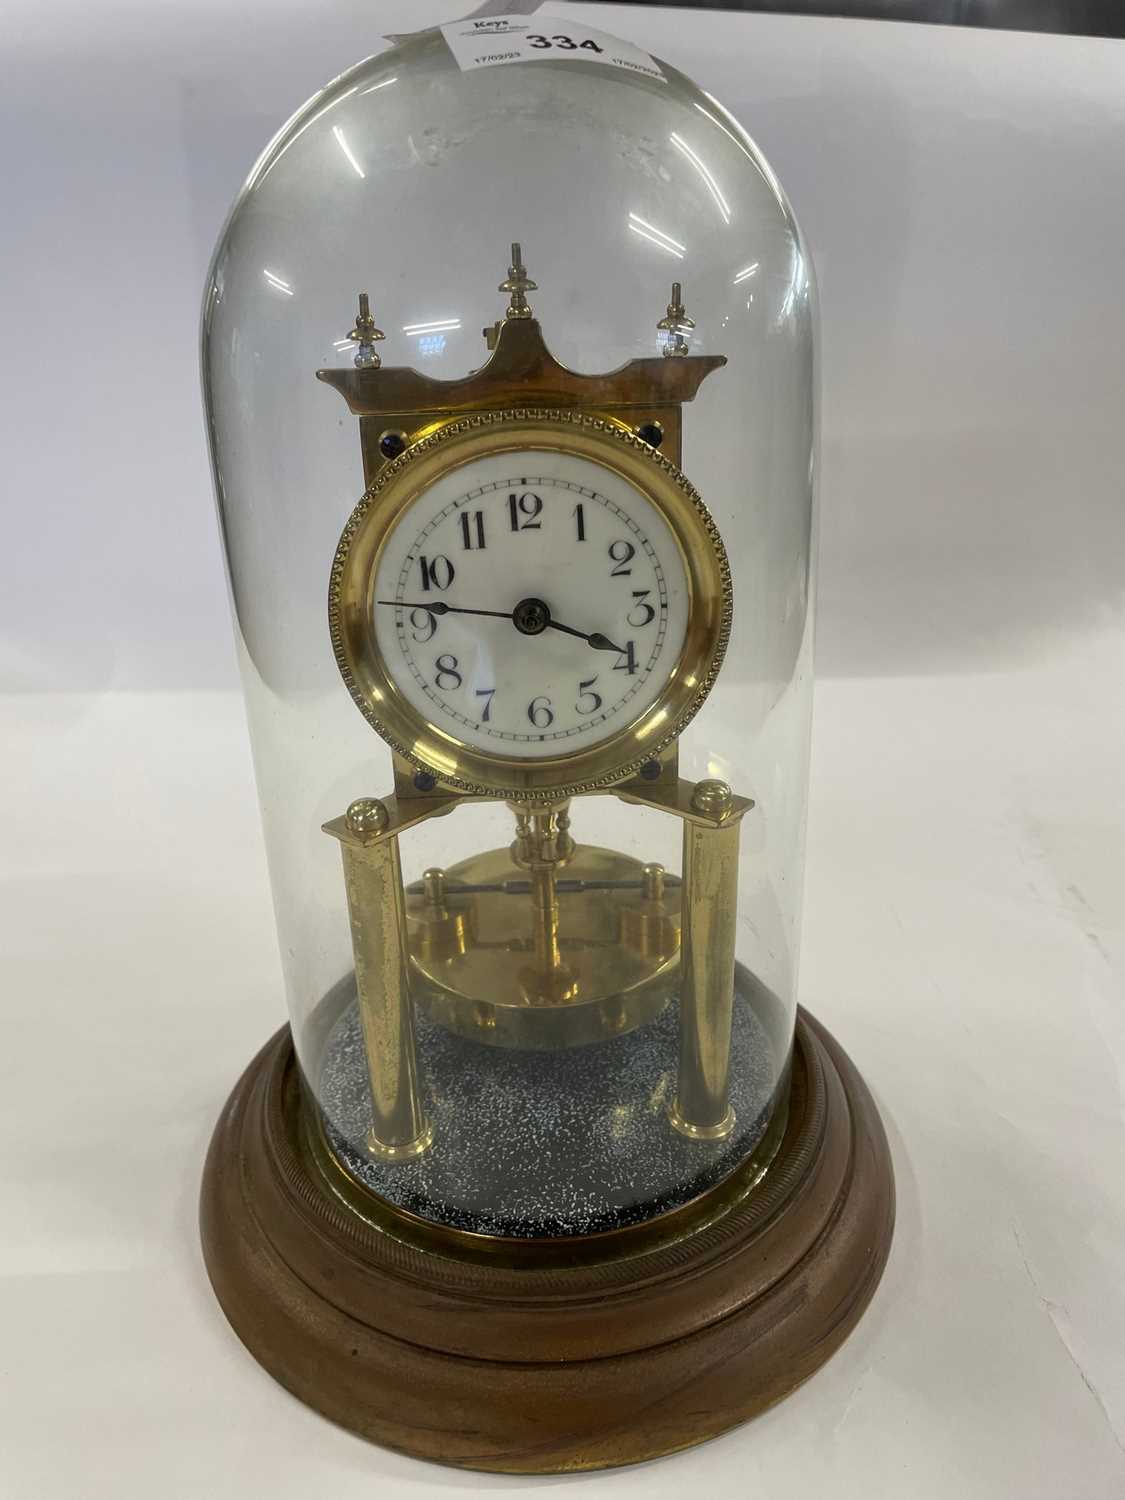 Anniversary clock under a glass dome - Image 2 of 4